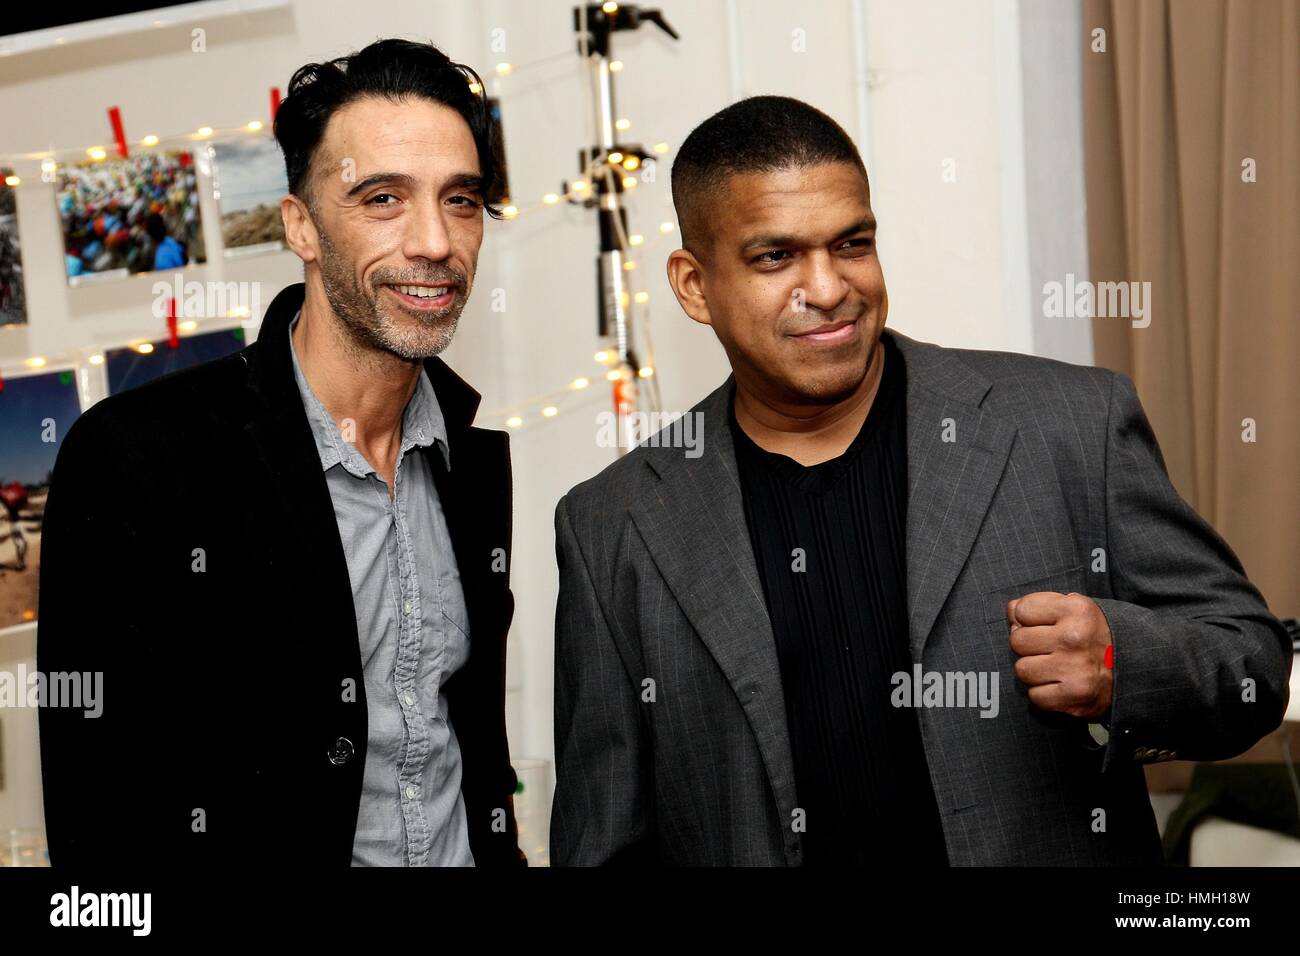 New York, NY, USA. 2nd Feb, 2017. Carlos Leon, Maurepaz Auguste in attendance for RE-TOUCH HAITI Charity Cocktail Party to Benefit The Artists Institute/Artists for Peace and Justice, Splashlight, New York, NY February 2, 2017. Credit: Steve Mack/Everett Collection/Alamy Live News Stock Photo